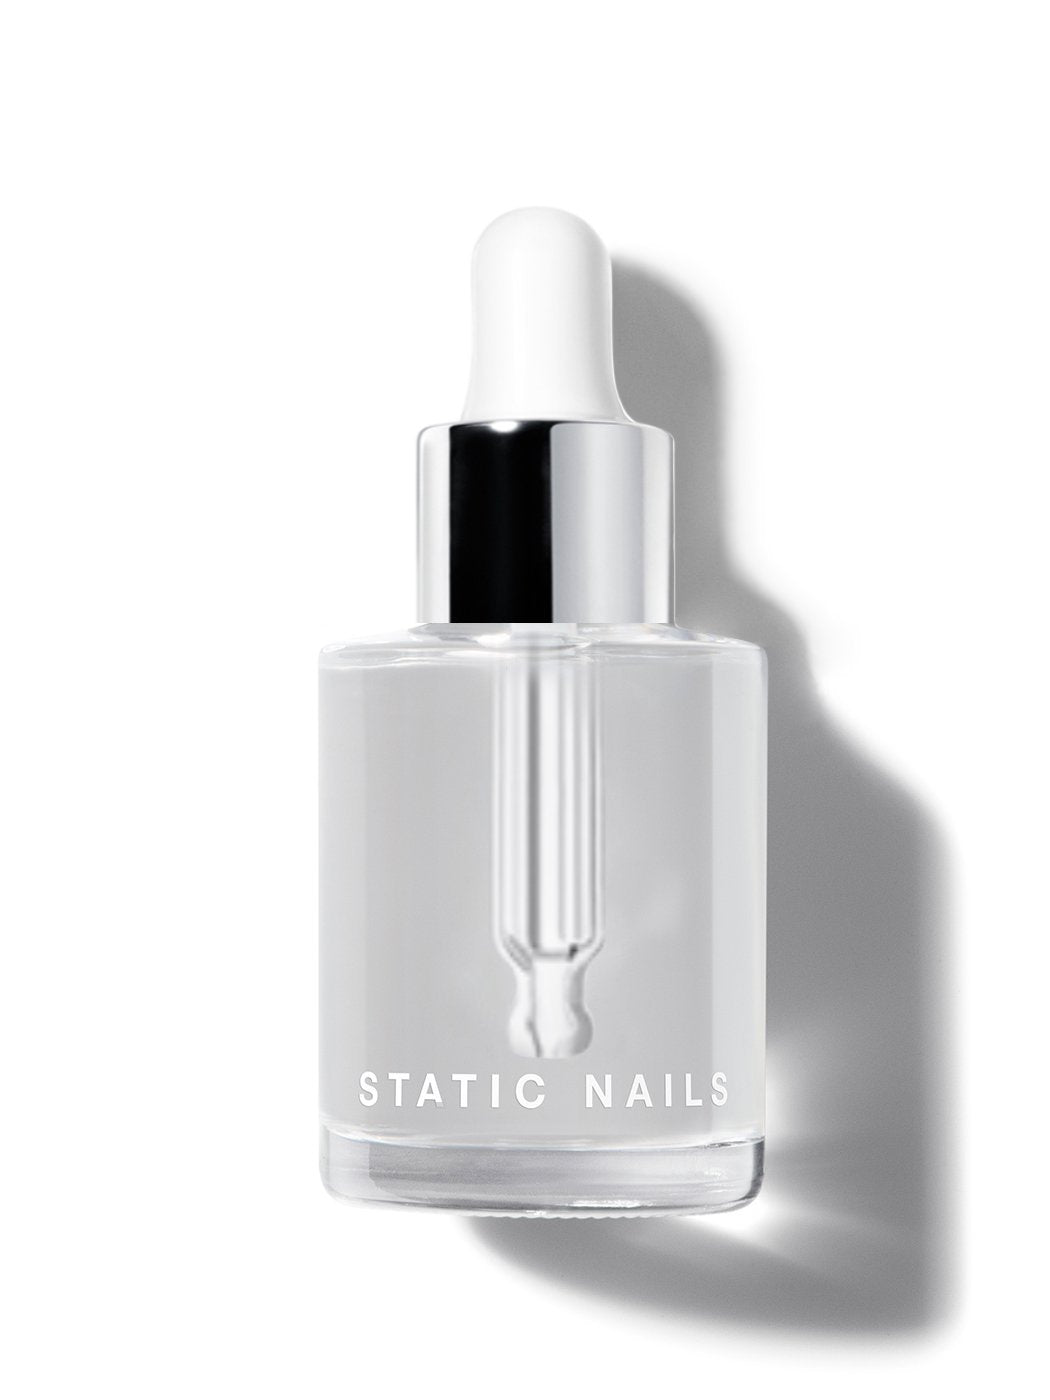 Clear bottle of quick drying nail polish drops